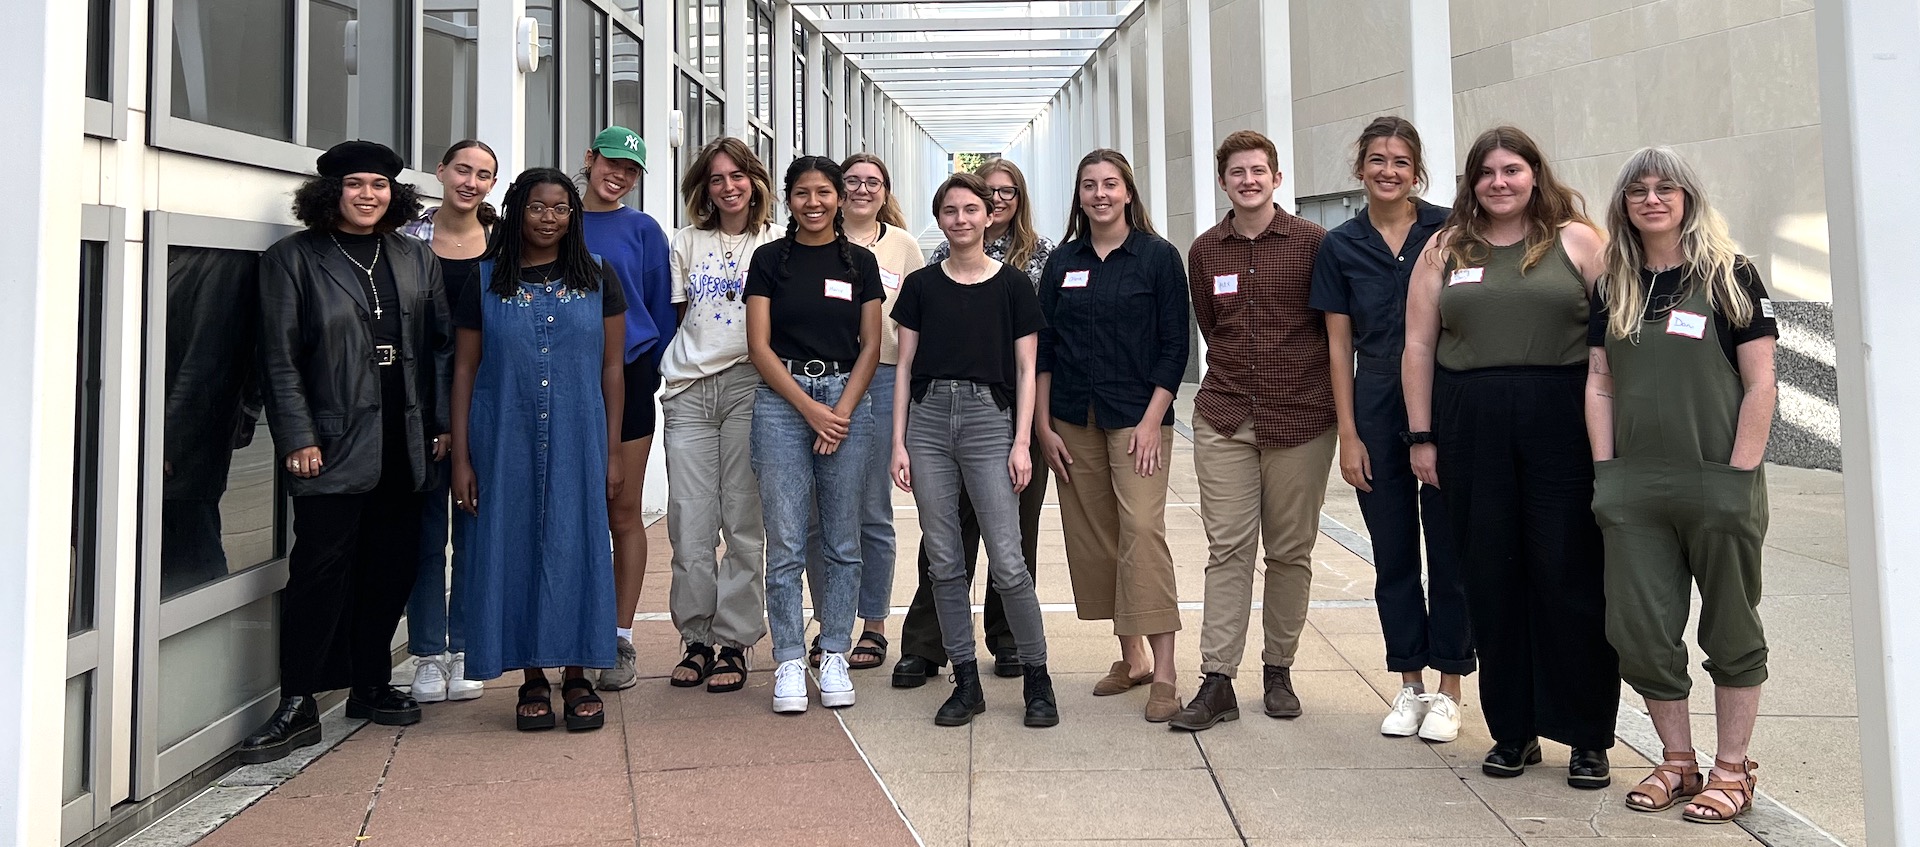 A lineup of 14 student interns working at the Wexner Center for the Arts in 2022-23. They're standing in a walkway between pillars of a white metal grid that's adjacent to the center building.